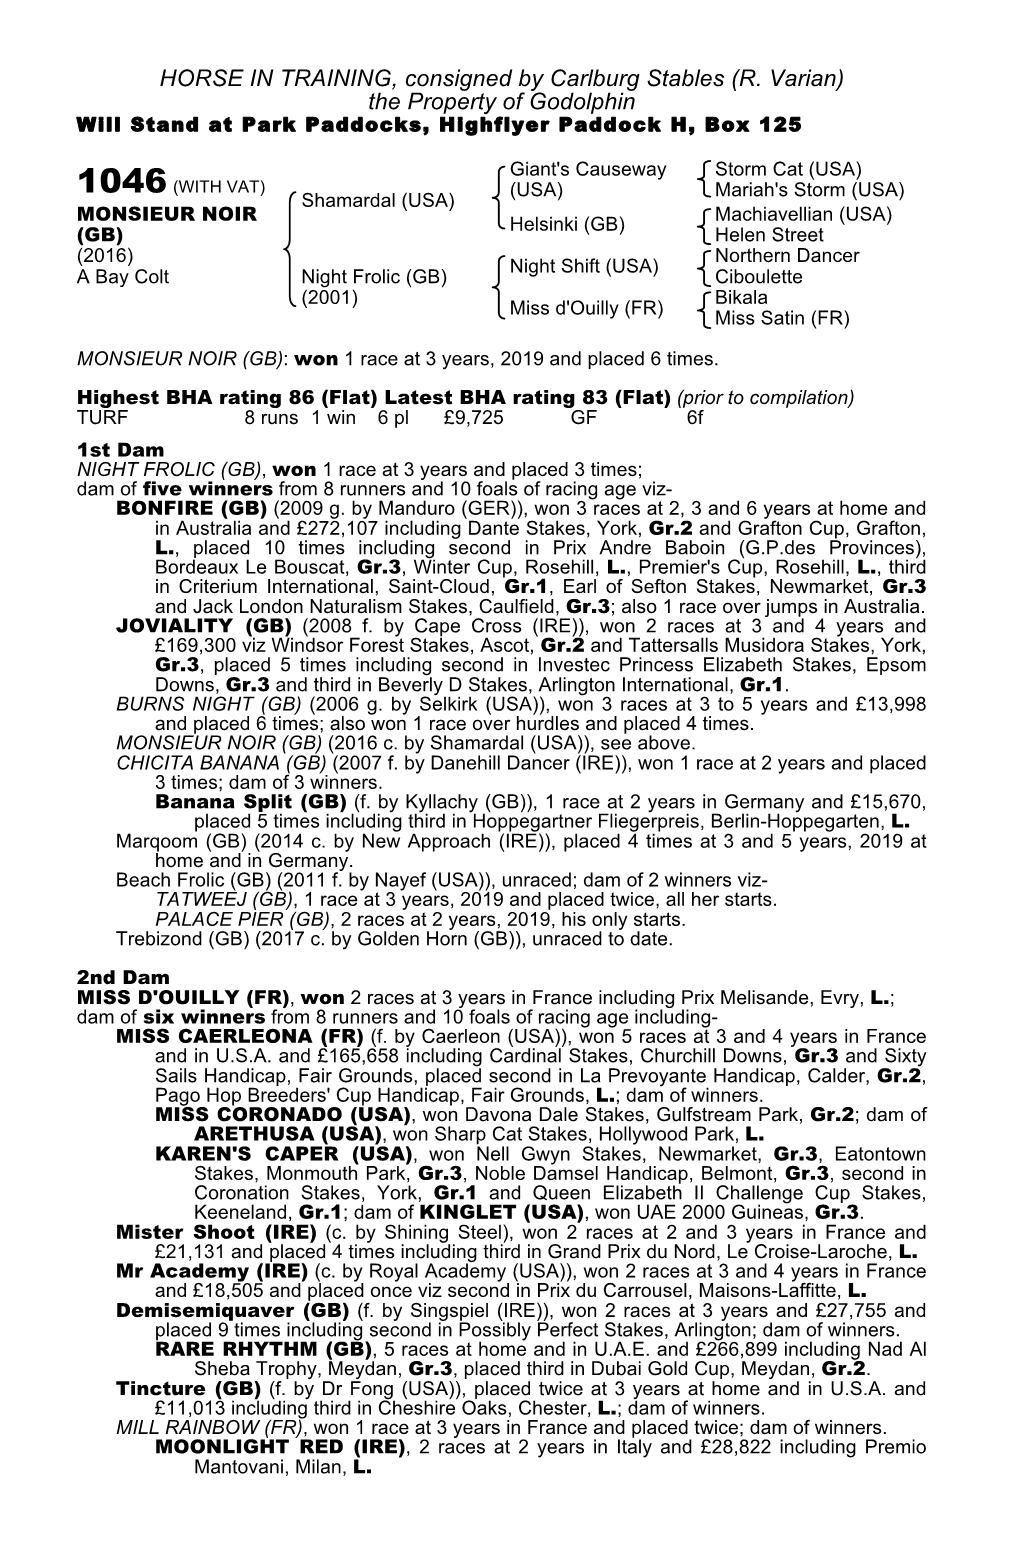 HORSE in TRAINING, Consigned by Carlburg Stables (R. Varian) the Property of Godolphin Will Stand at Park Paddocks, Highflyer Paddock H, Box 125